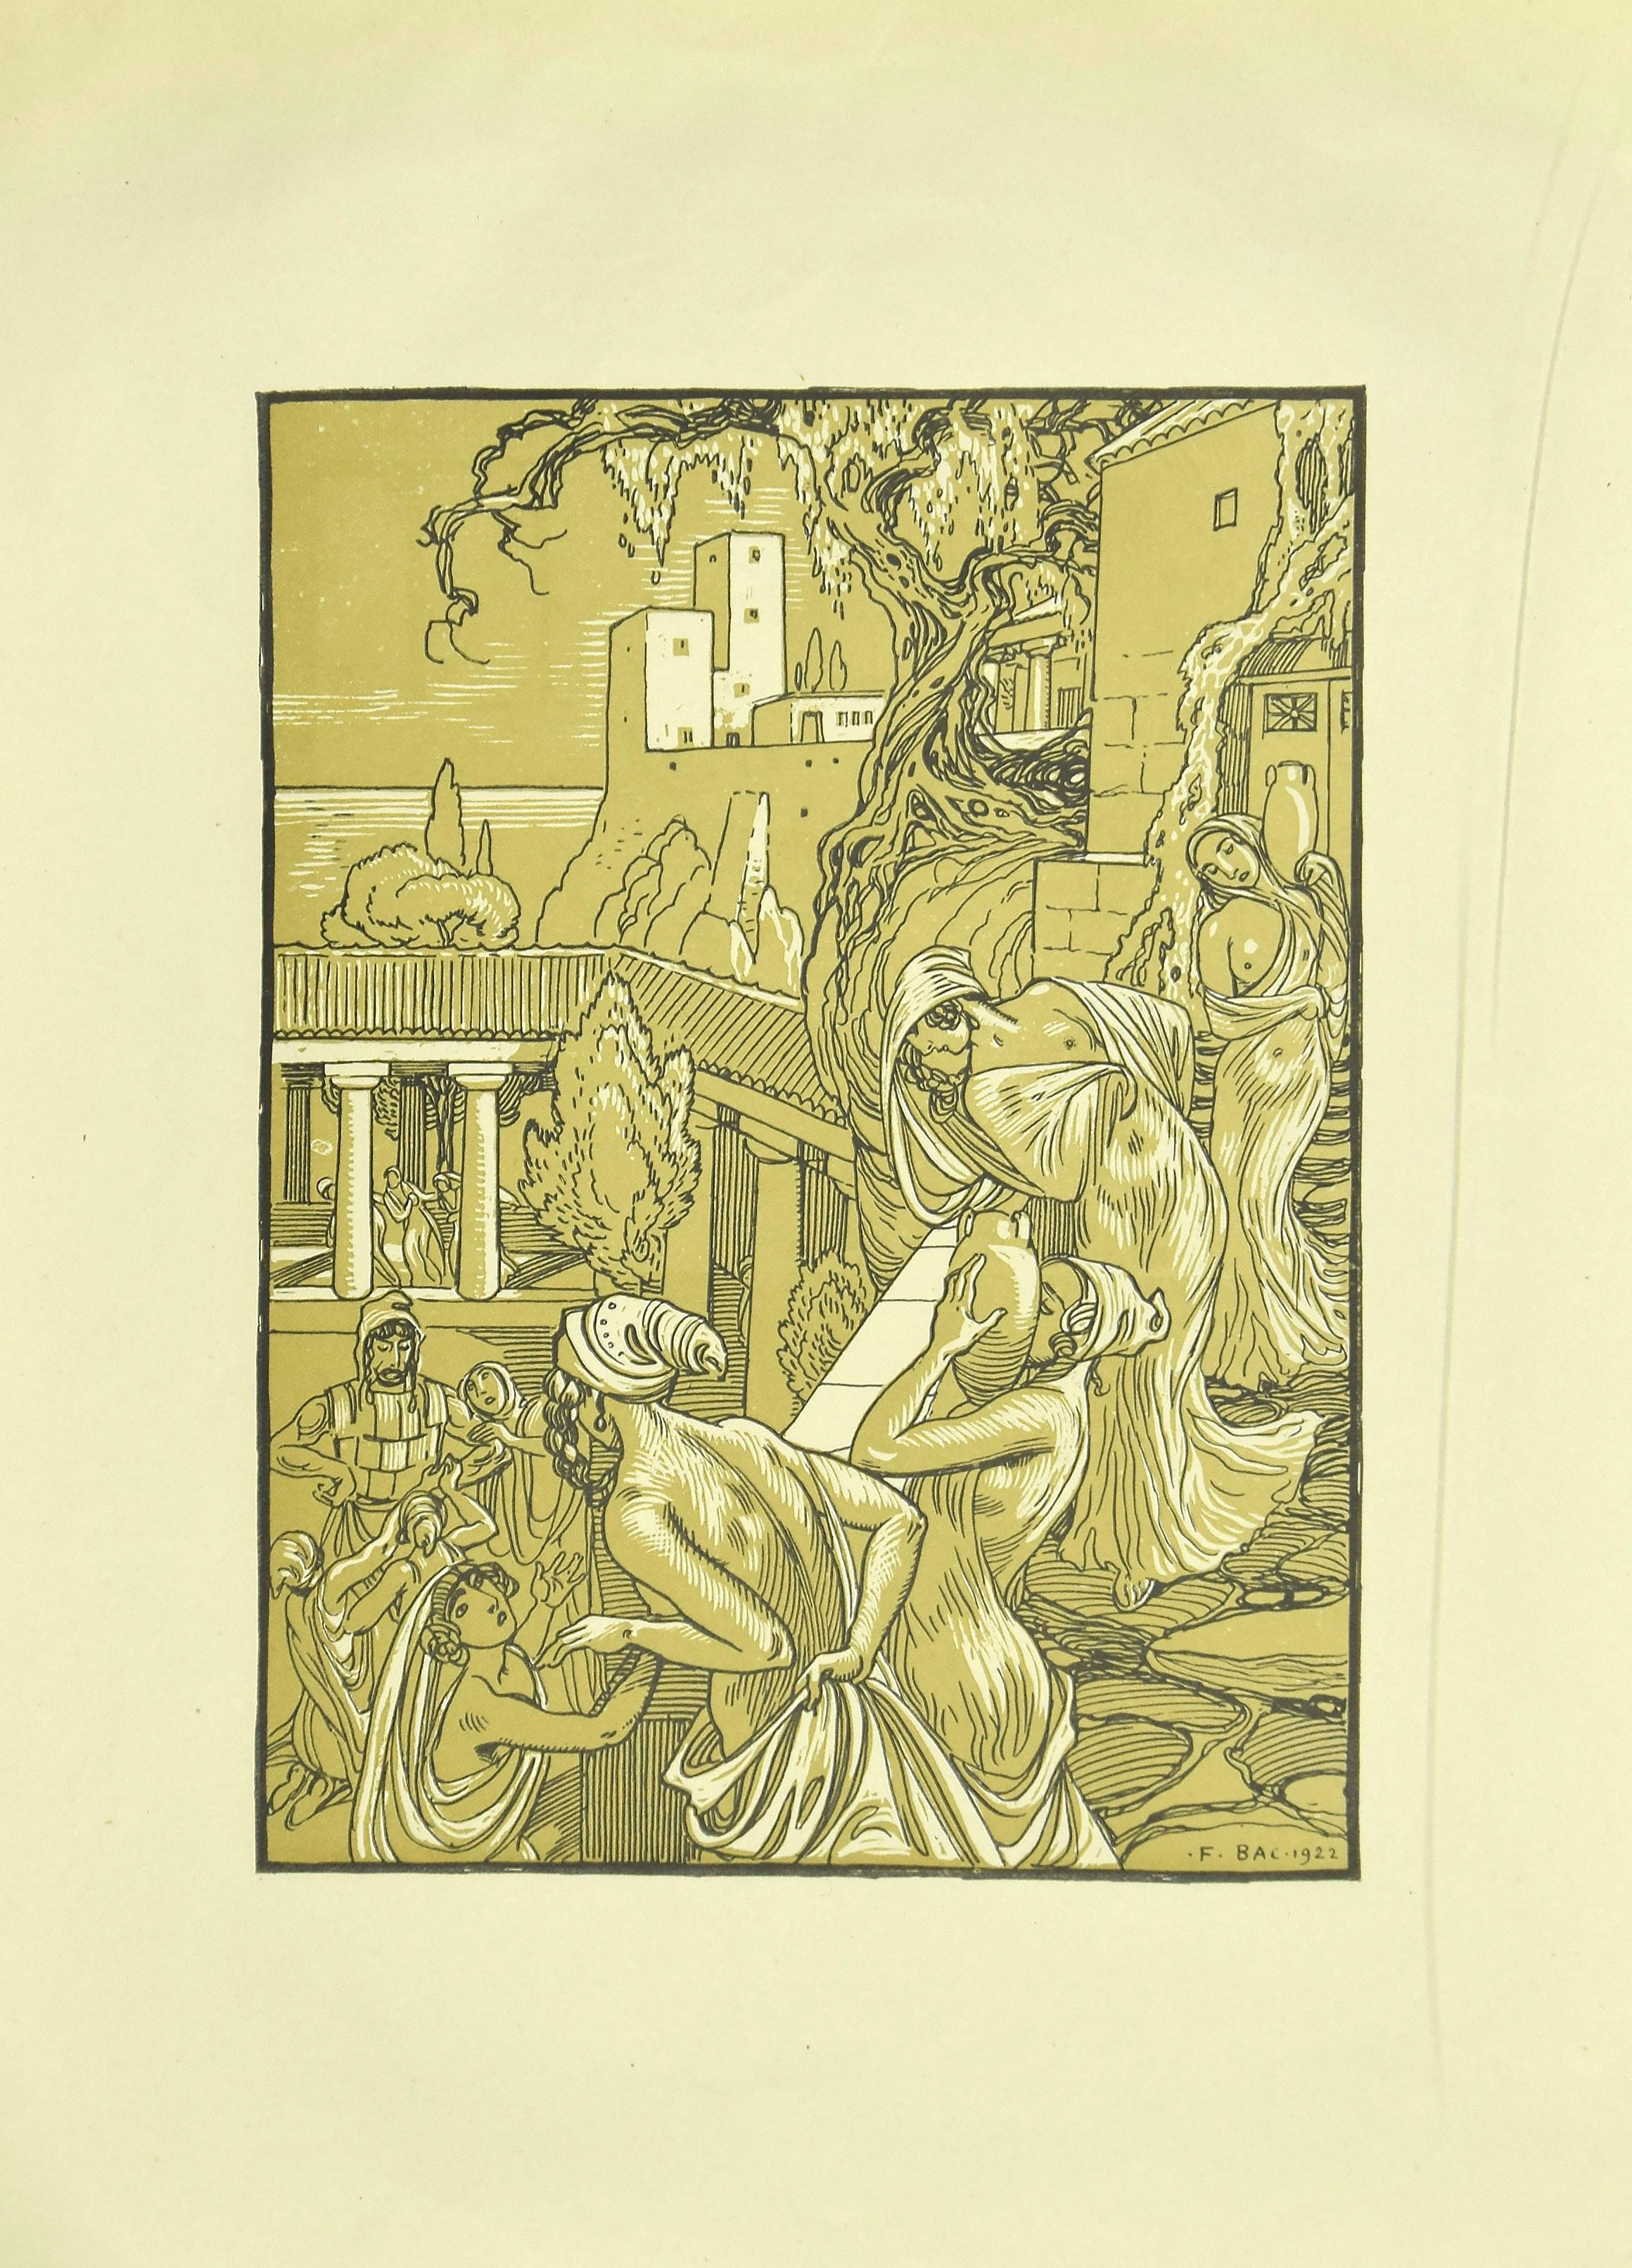 The Carriers of the Amphorae - Original Lithograph by F. Bac - 1922